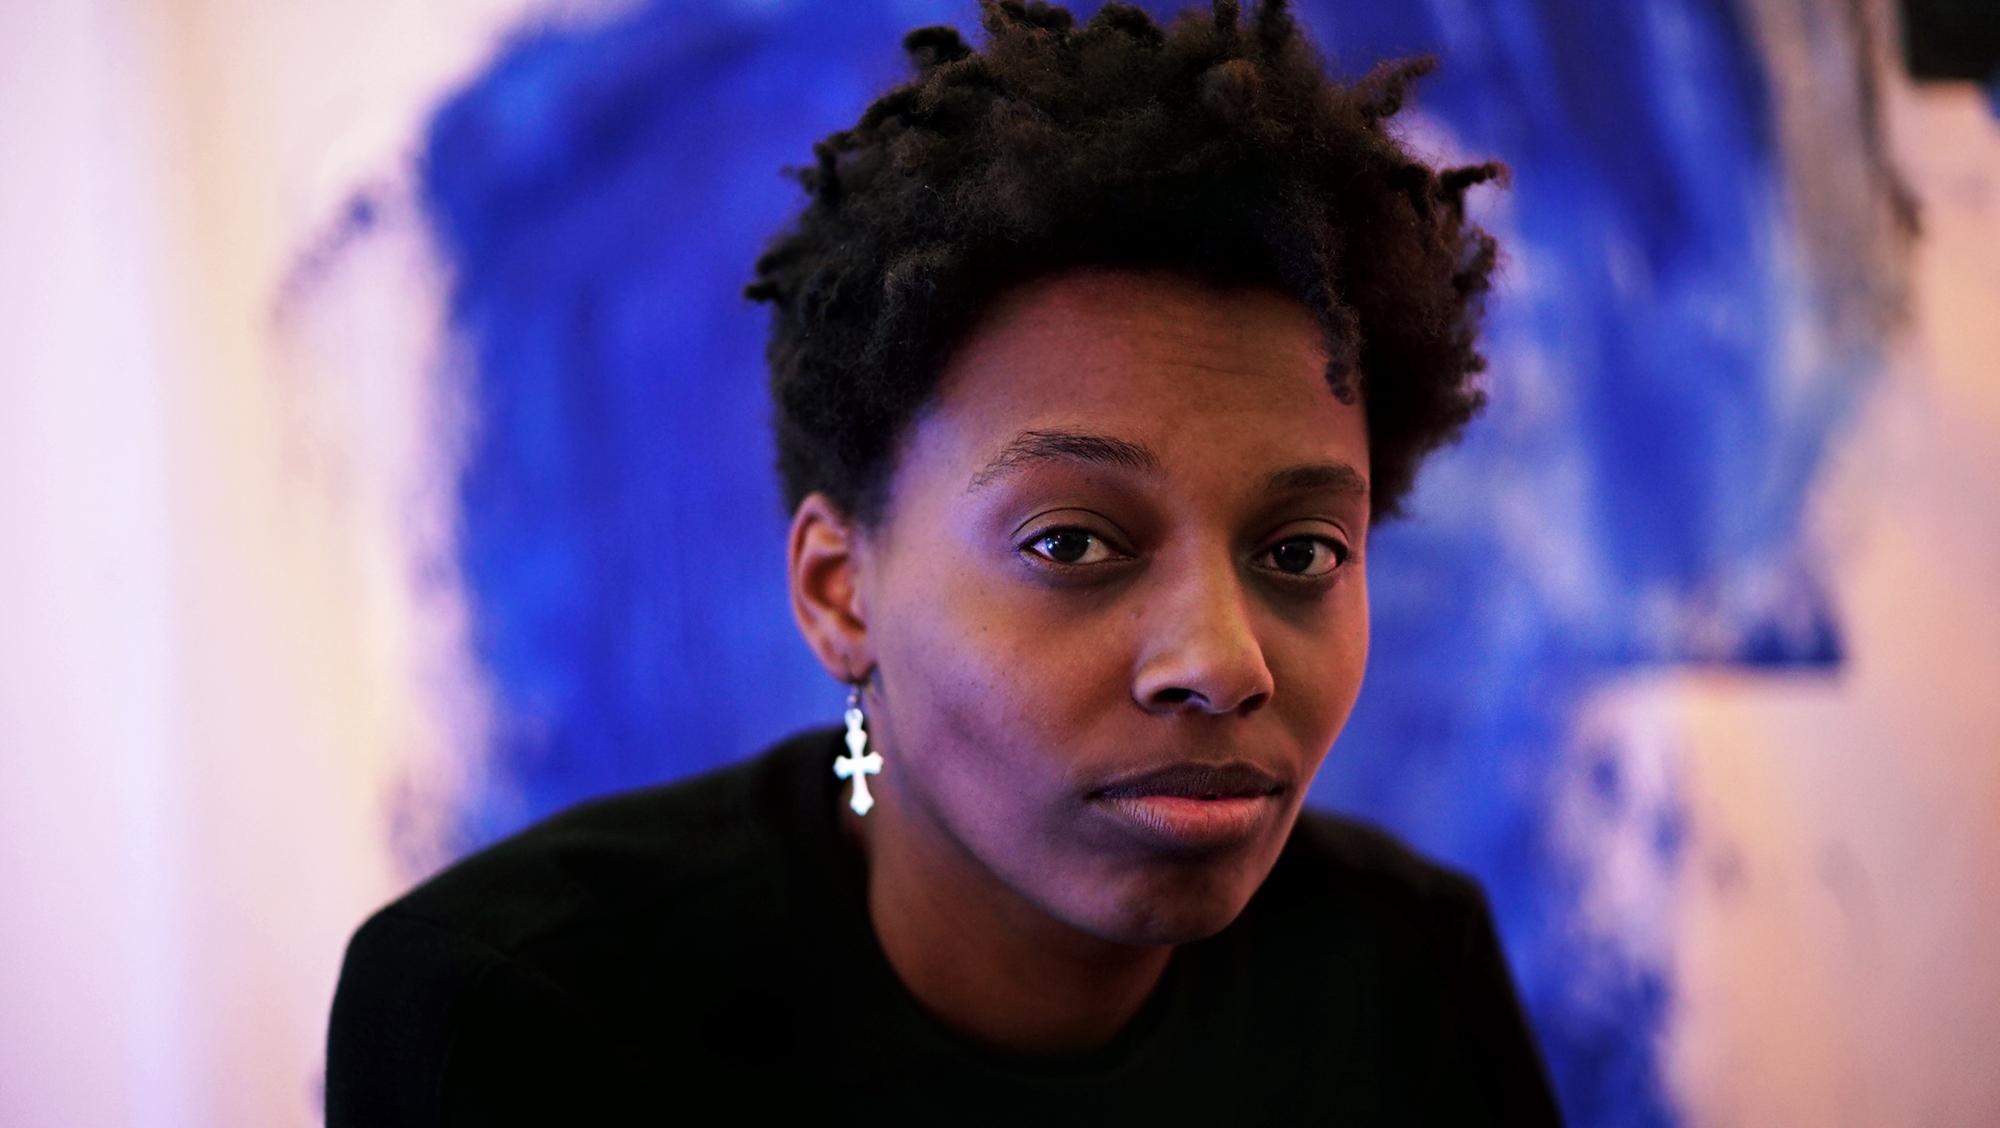 A photo of the artist Le'Andra LeSeur in front of a blue painting blurry in the background. LeSeur has short hair and wears a cross earring.